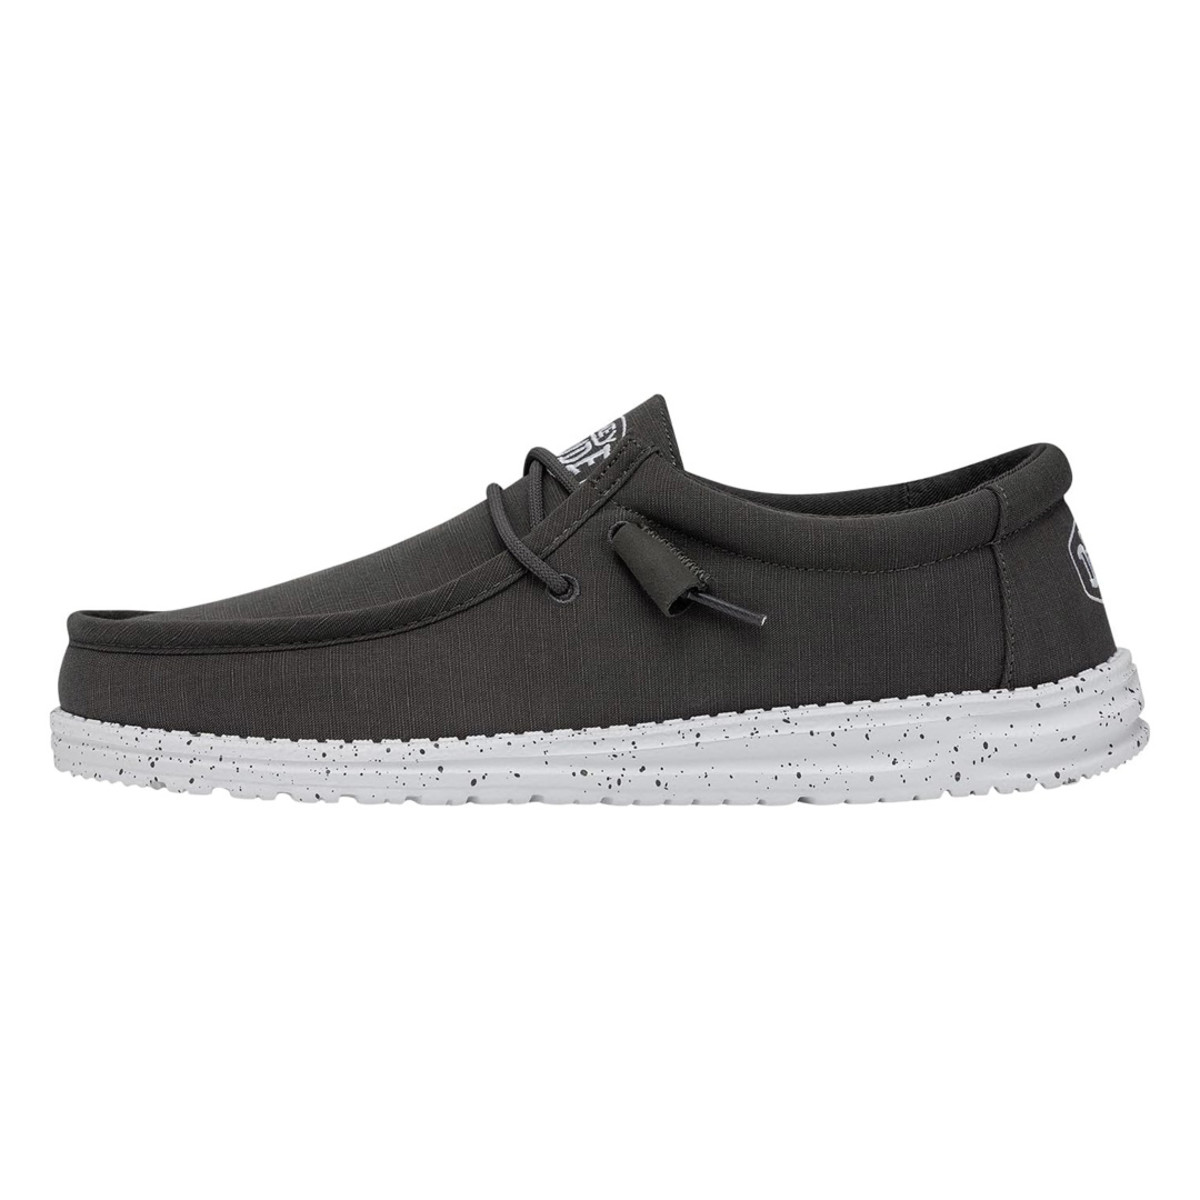 Women hey dude shoes • Compare & find best price now »